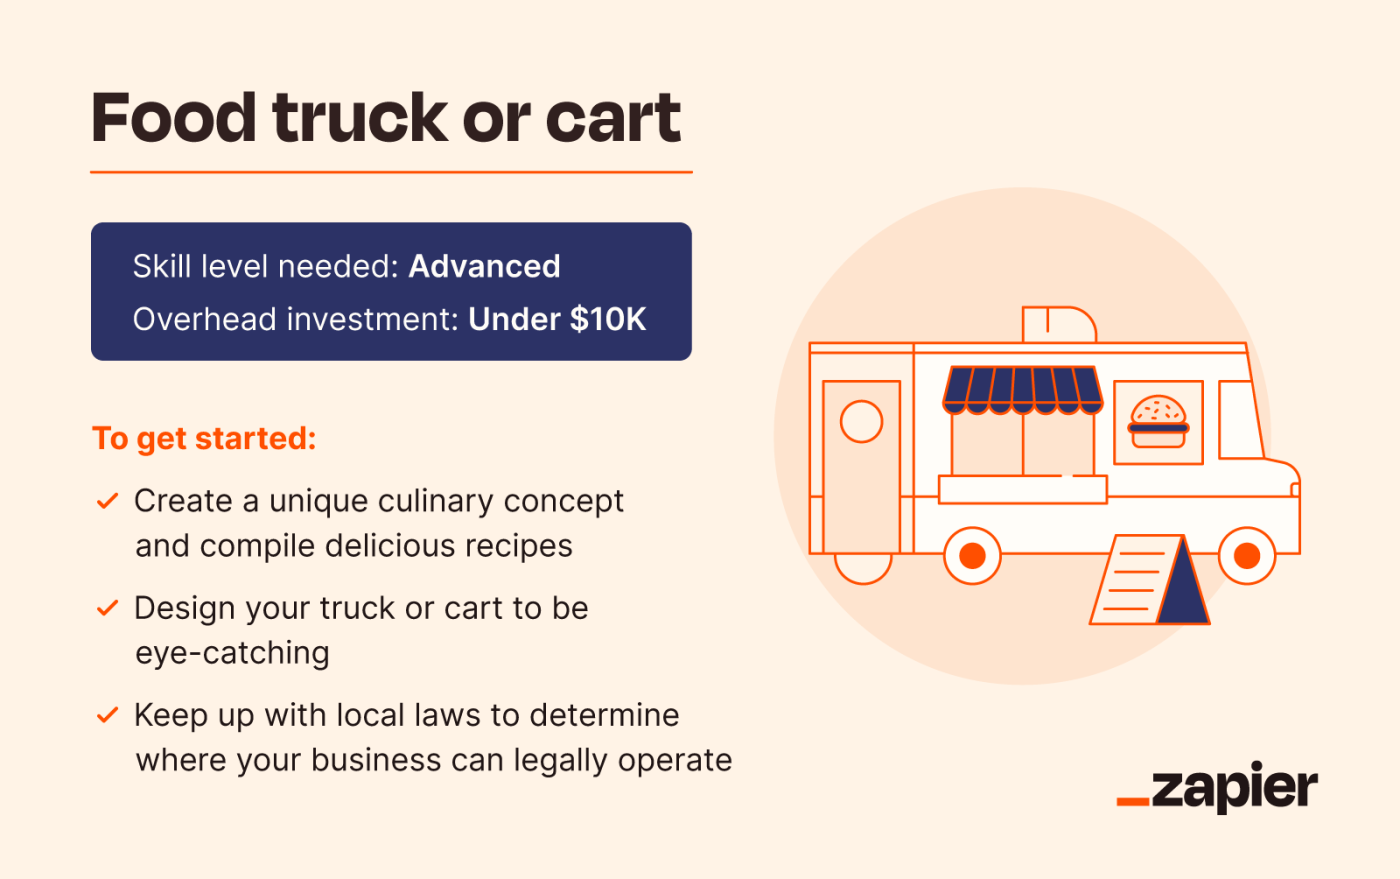 Image depicting a food truck icon showing that skill level needed is "advanced," overhead investment is under $10K, and tips to get started. 